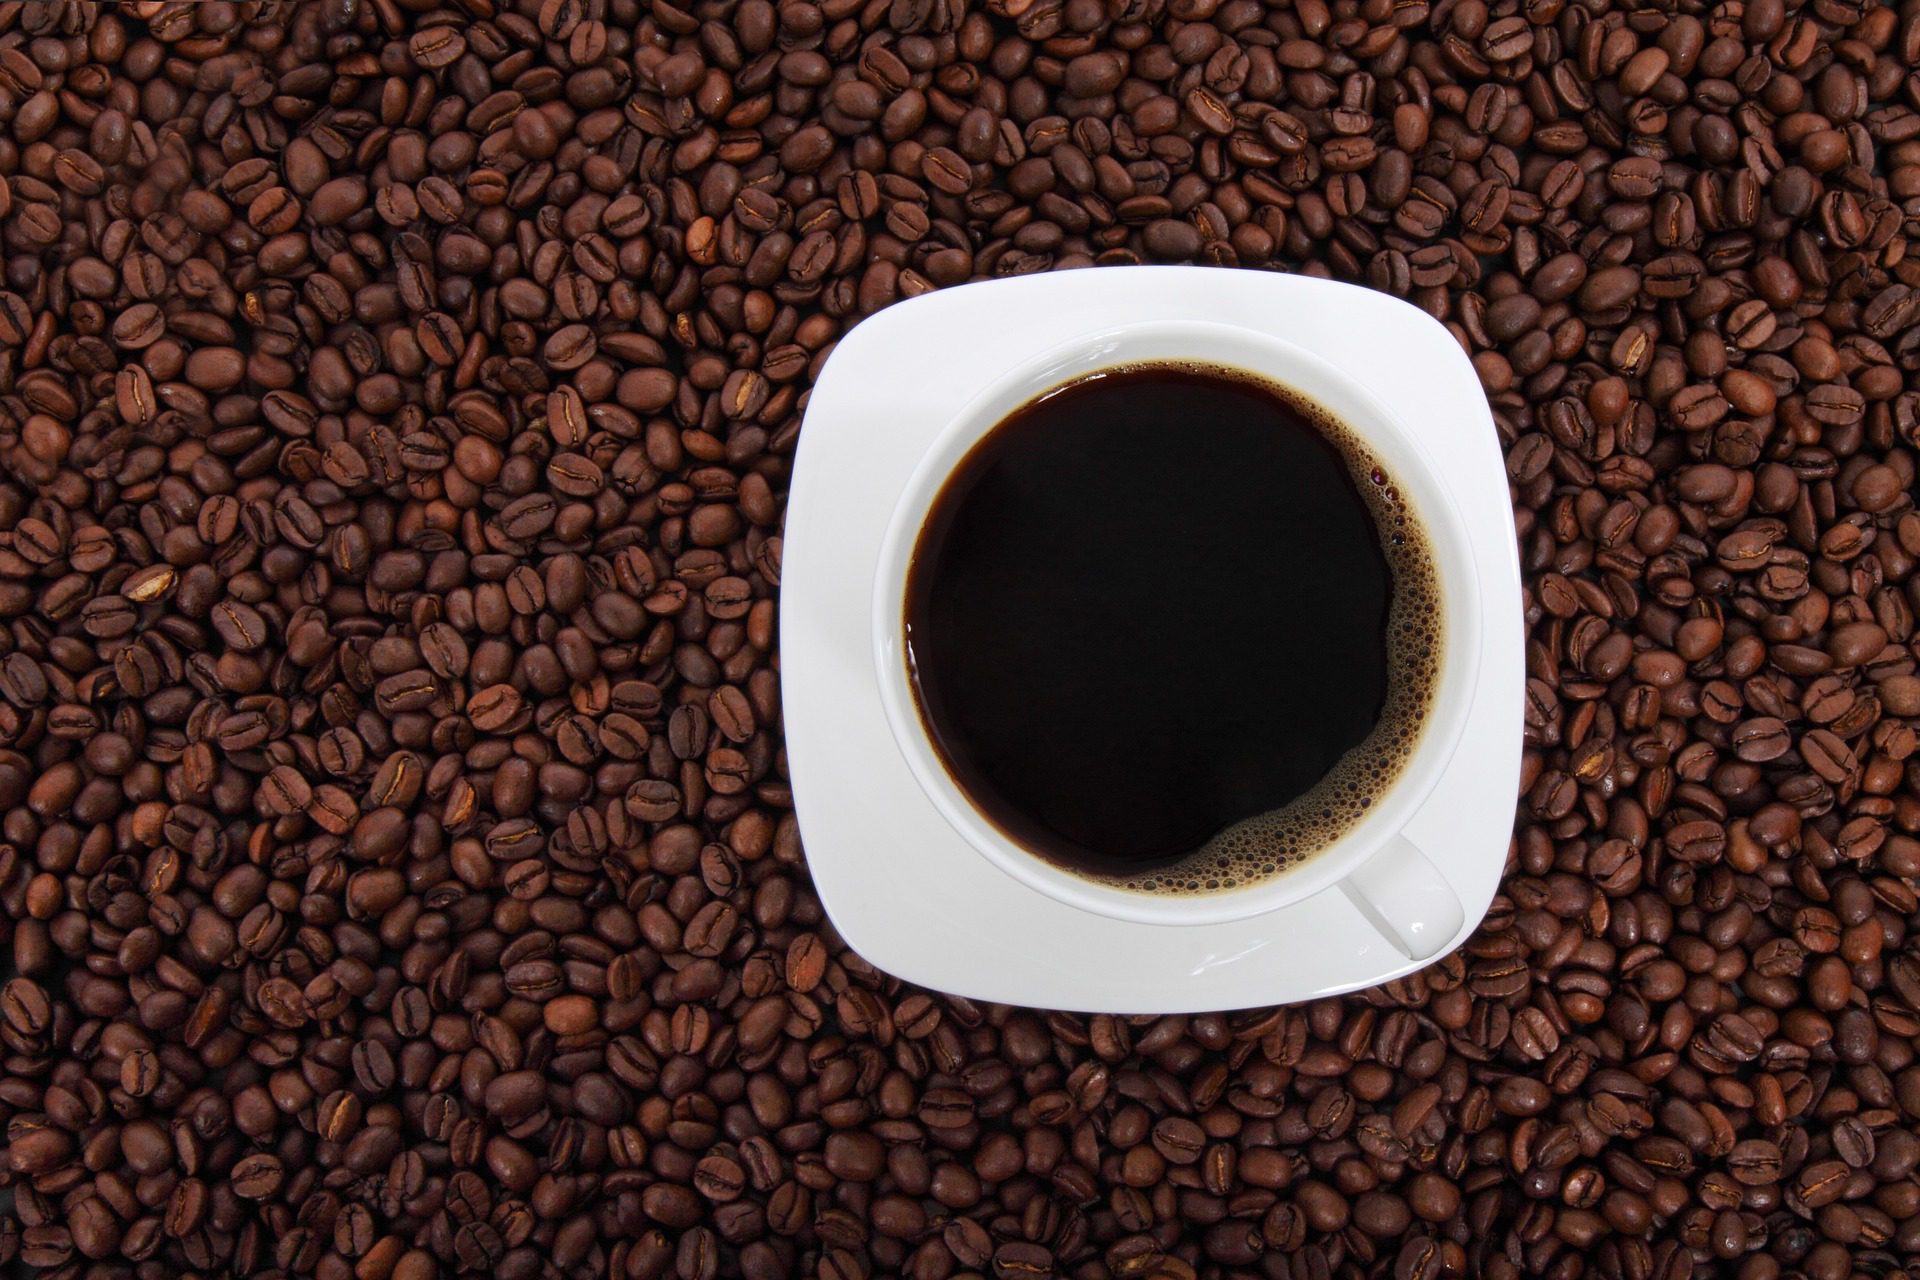 Coffee drinking is related to increased lifespan